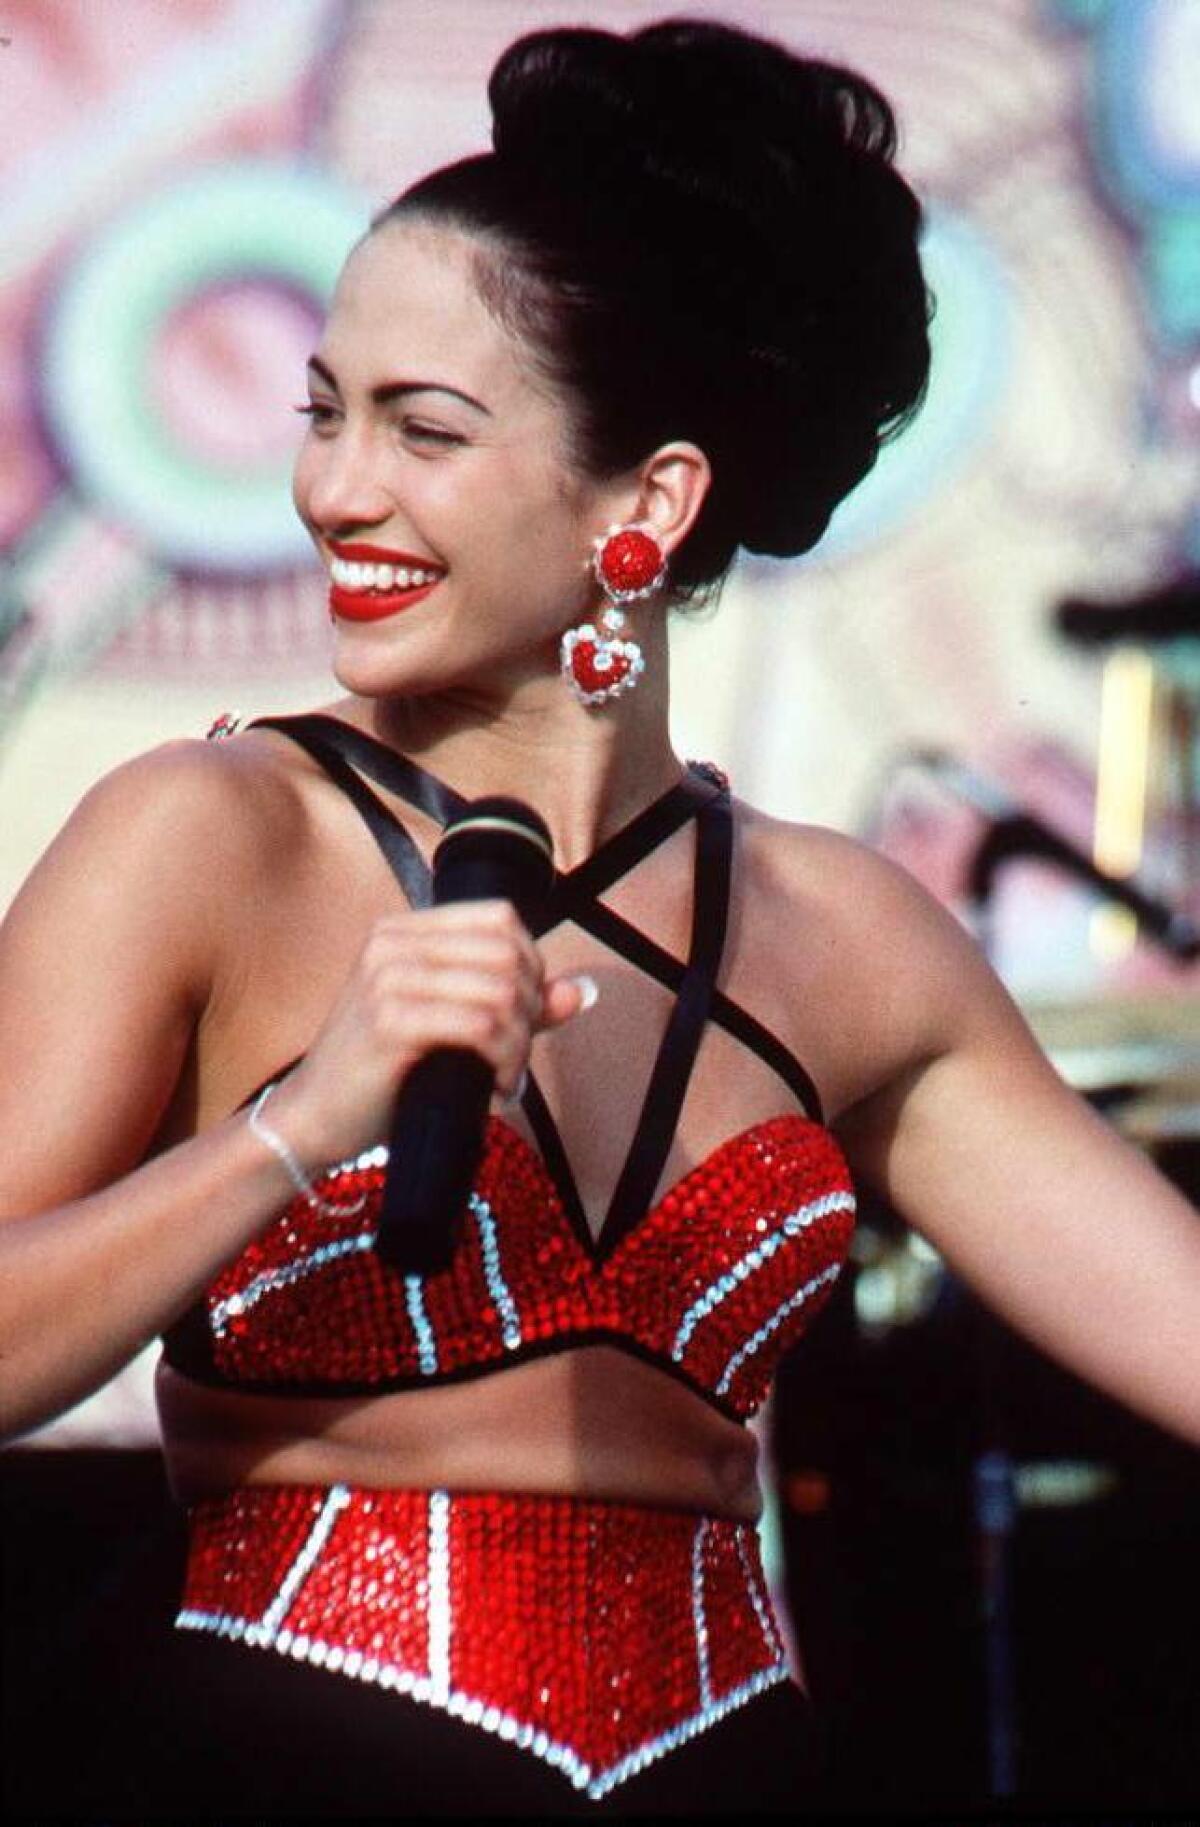 Actress Jennifer Lopez, who plays Selena in the movie "Selena," performs in one of the scenes from the movie.